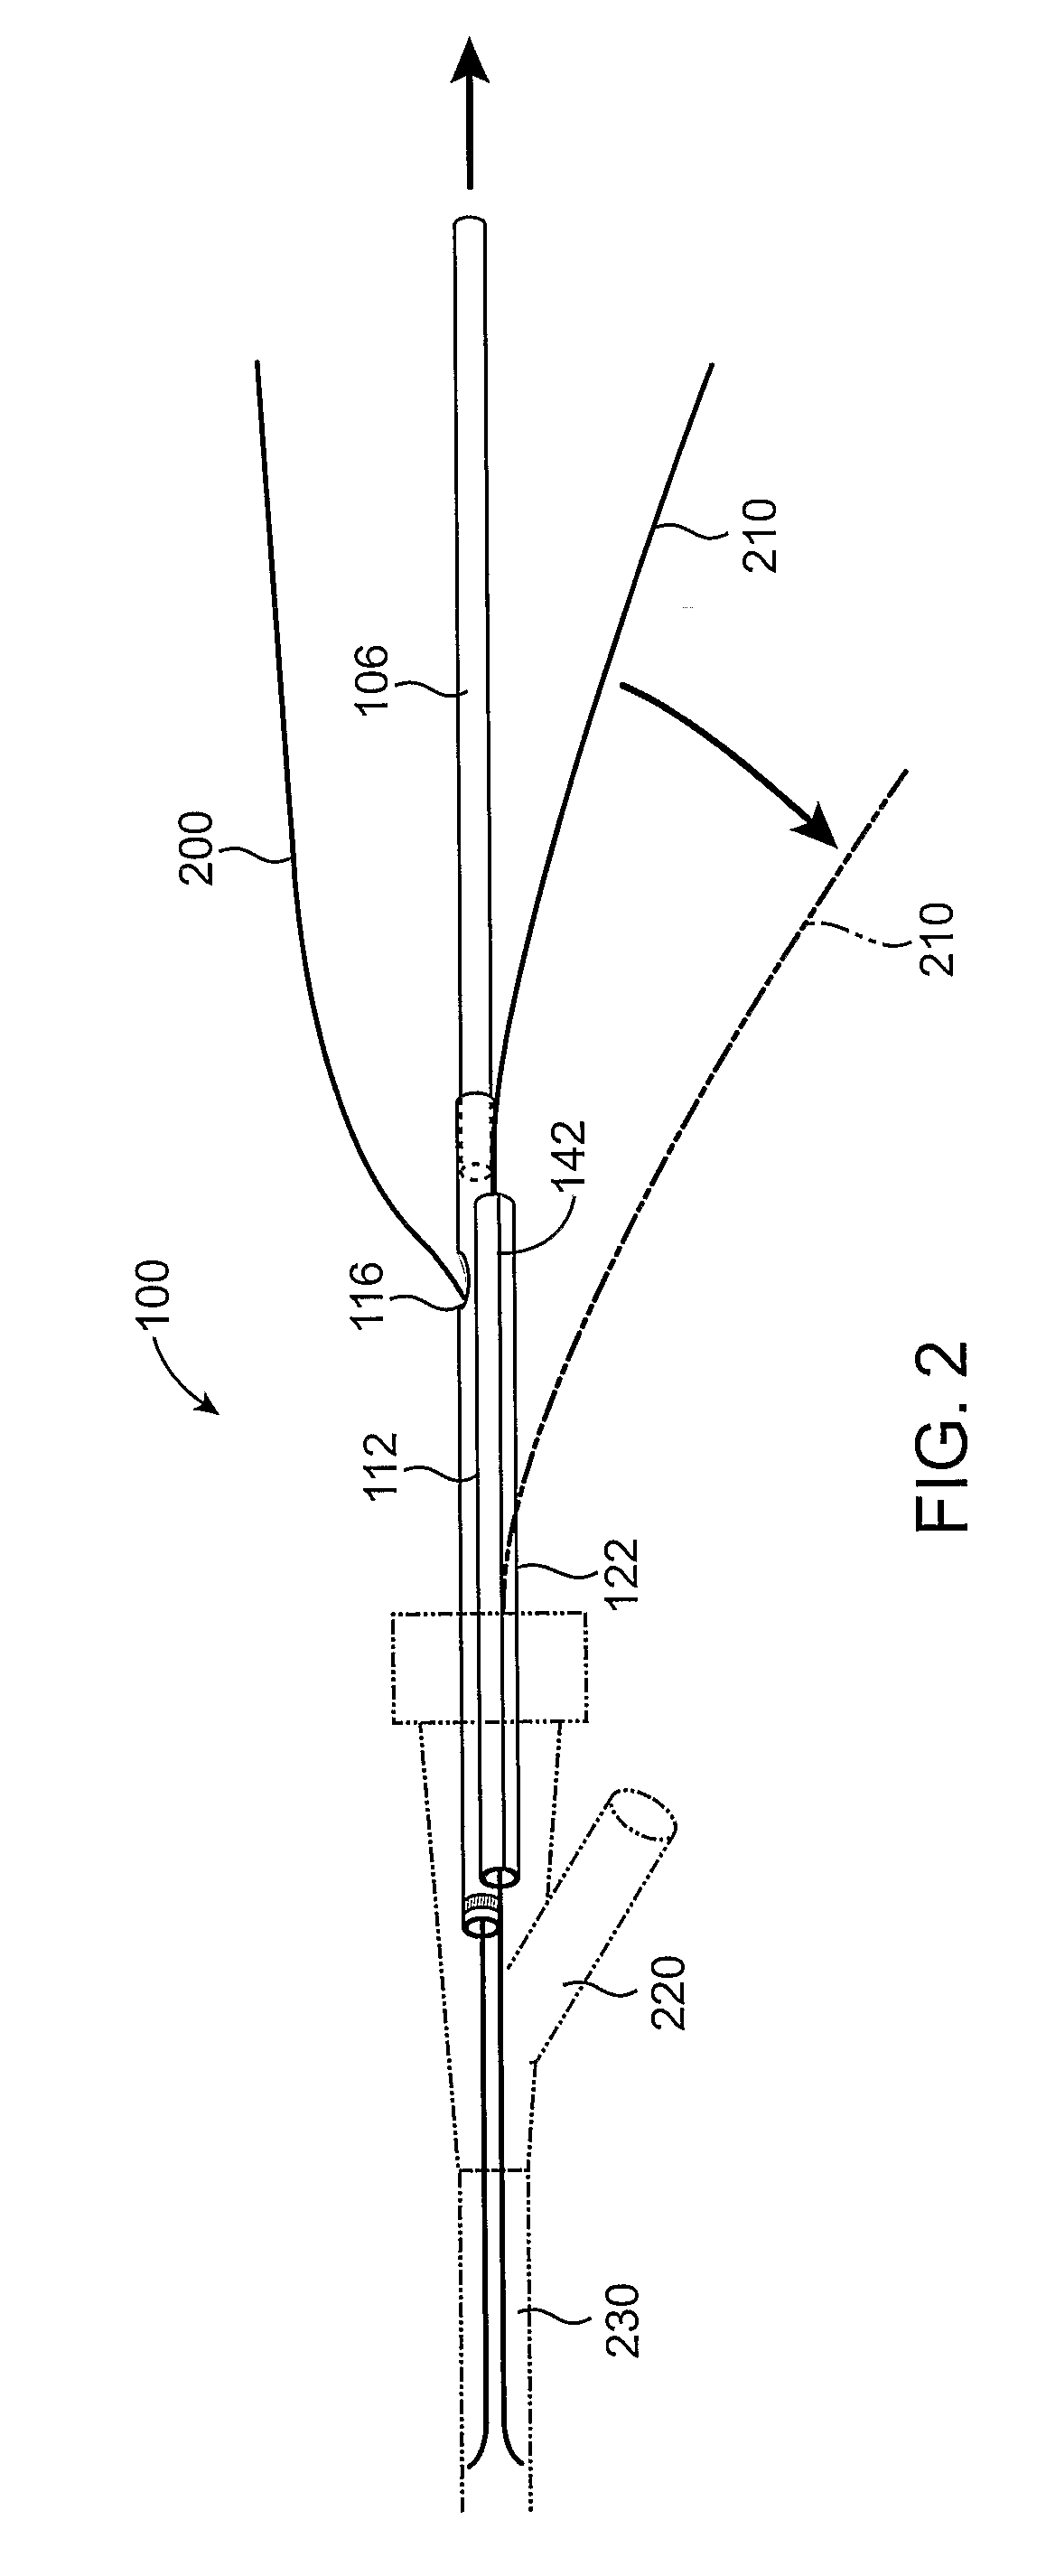 Guidewire Separator Device and Method of Use